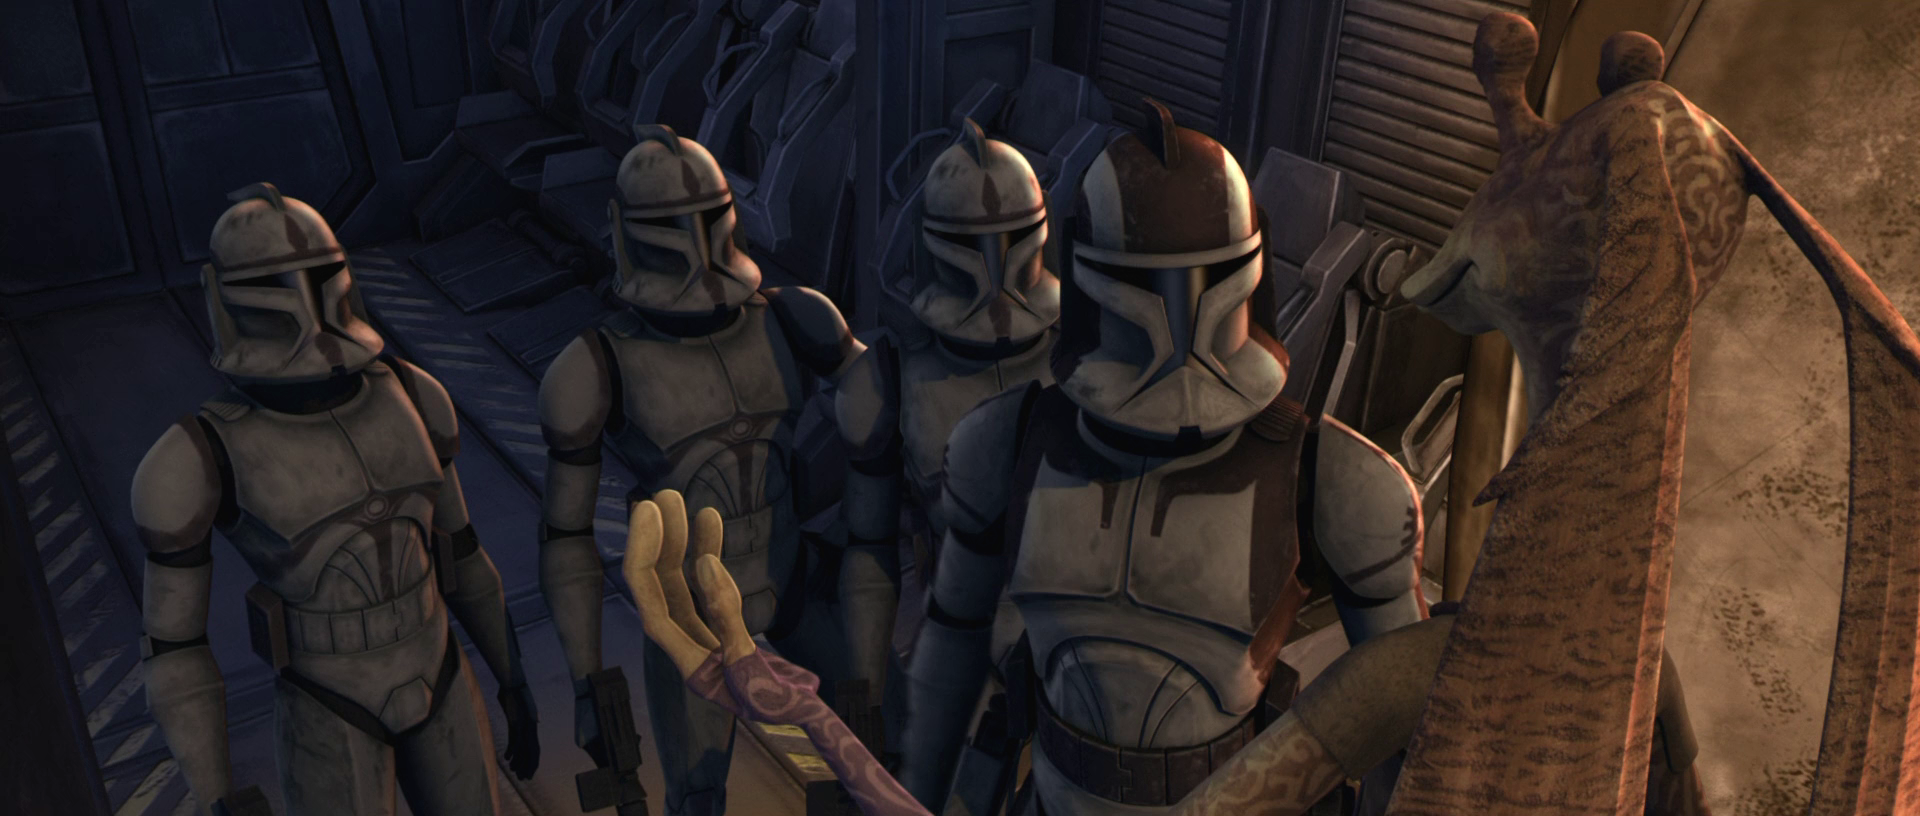 clone wars making an army of clones roblox game of clones